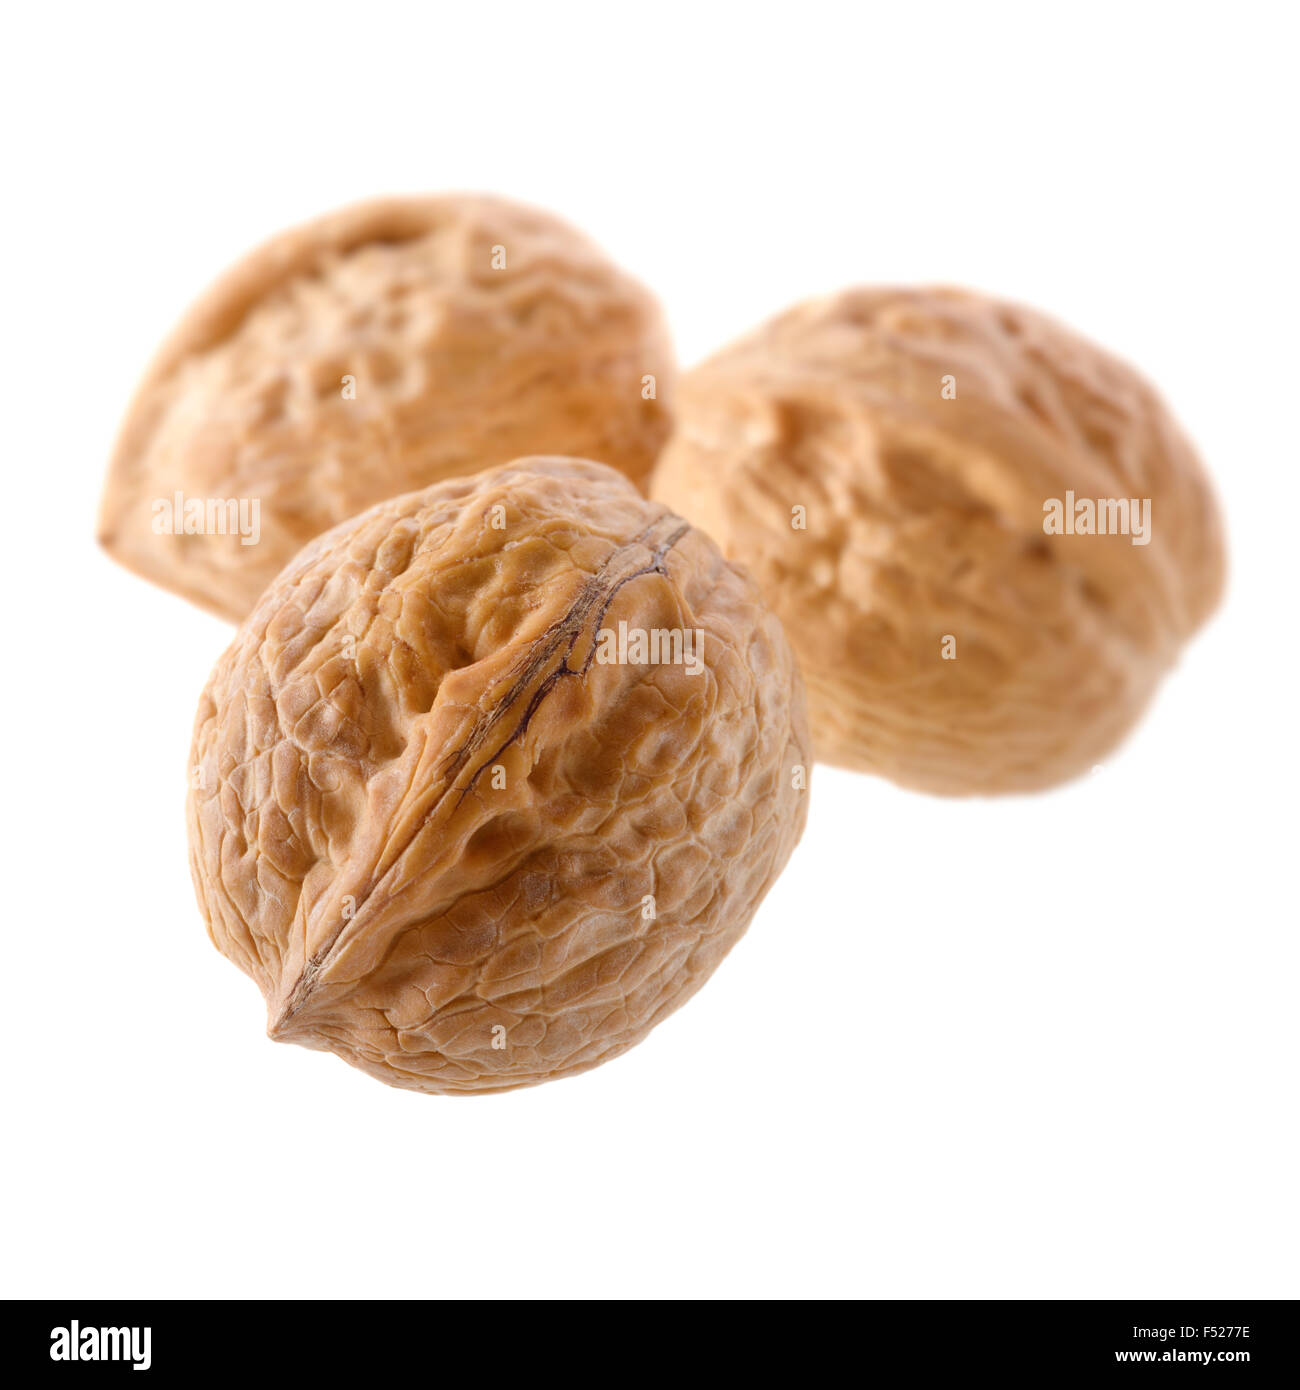 Food: group of walnuts, isolated on white background Stock Photo